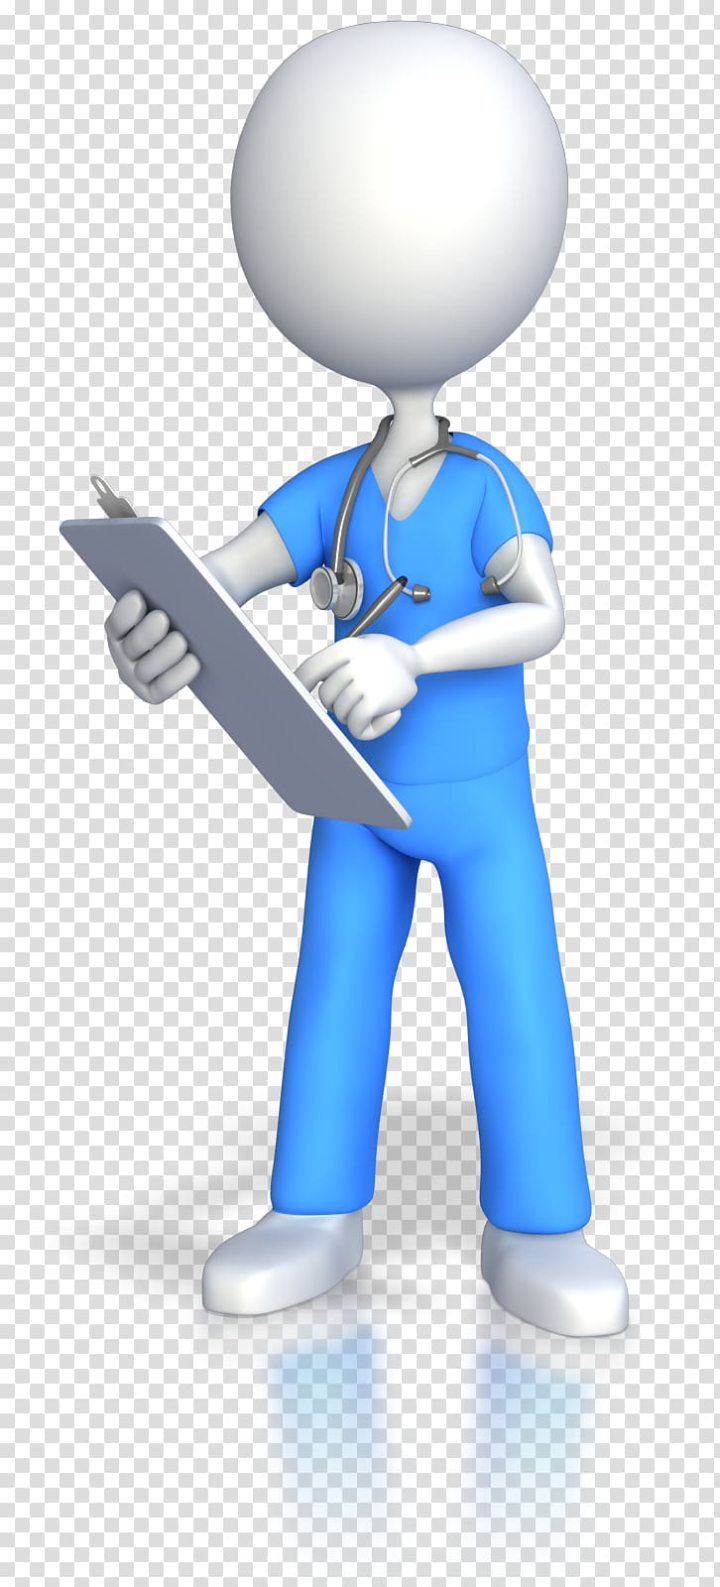 registered,nurse,stick,figure,male,hand,presentation,computer wallpaper,cartoon,arm,medicine,patient,surgery,medical equipment,healthcare,professional,technology,reflect,reform,surgeon,suggestion,sitting,standing,stethoscope,profession,physician,certified nurse midwife,communication,computer icons,figurine,finger,health care,human behavior,joint,numbers,thumb,nursing,registered nurse,stick figure,animation,male nurse,doctor,animated,character,png clipart,free png,transparent background,free clipart,clip art,free download,png,comhiclipart